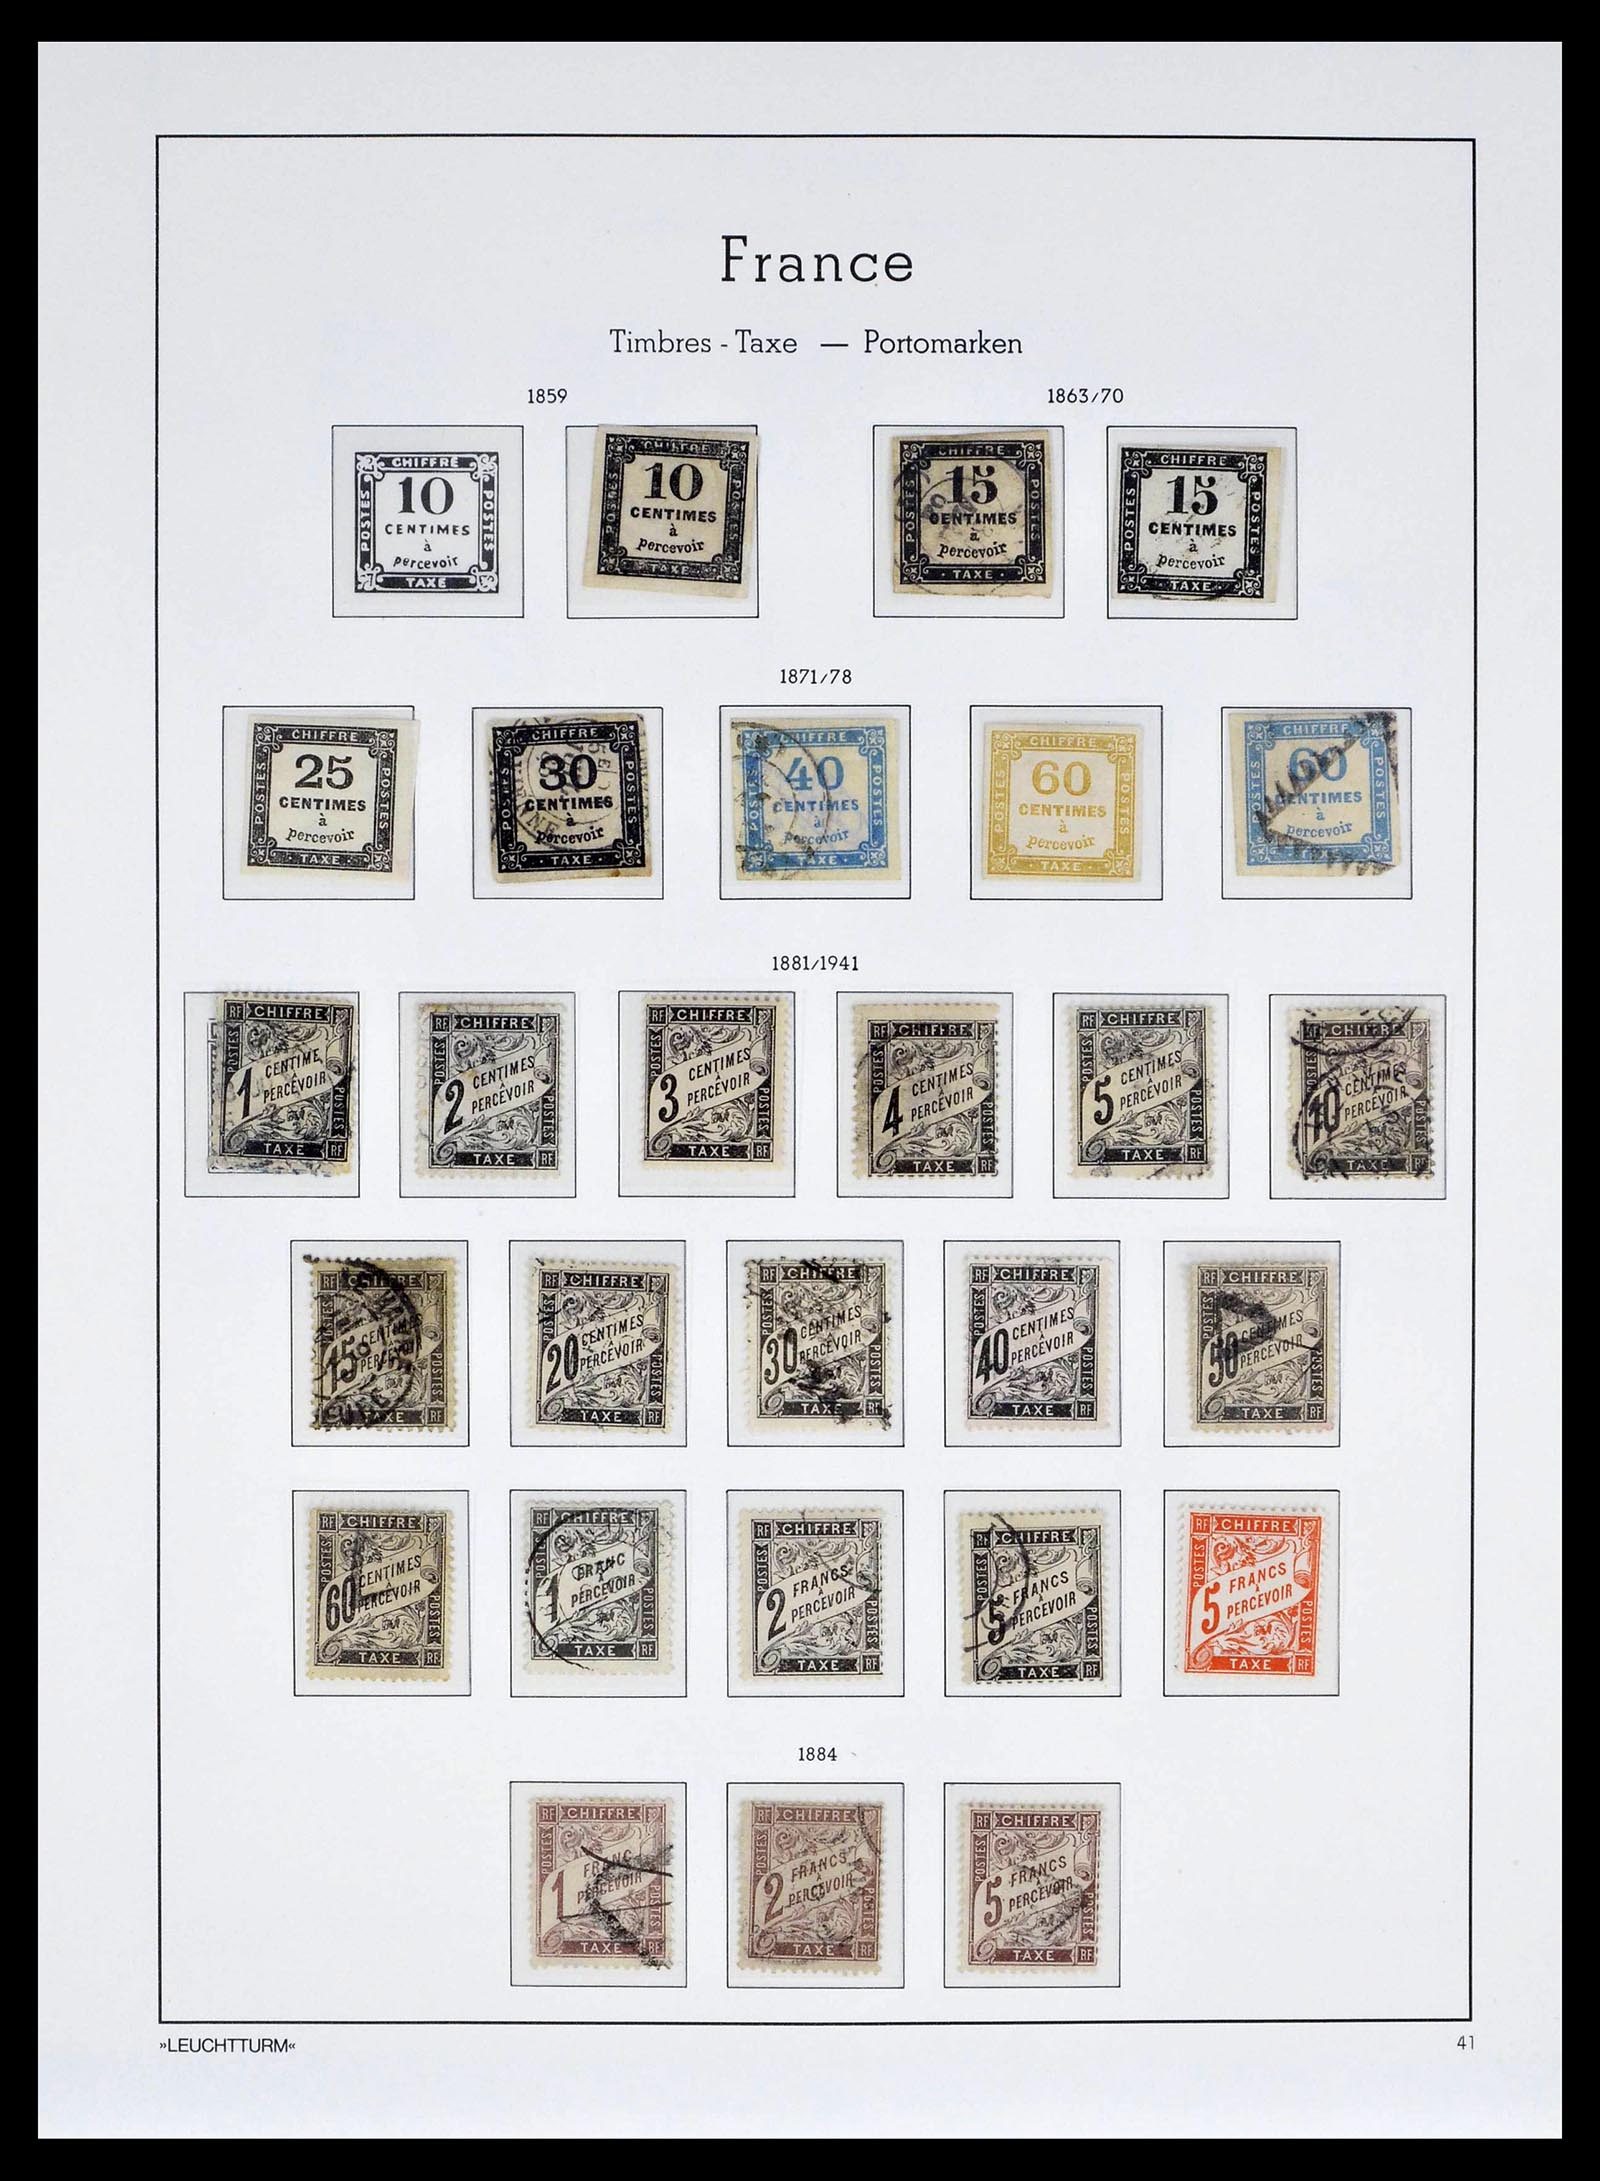 39408 0002 - Stamp collection 39408 France postage dues 1859-1946.